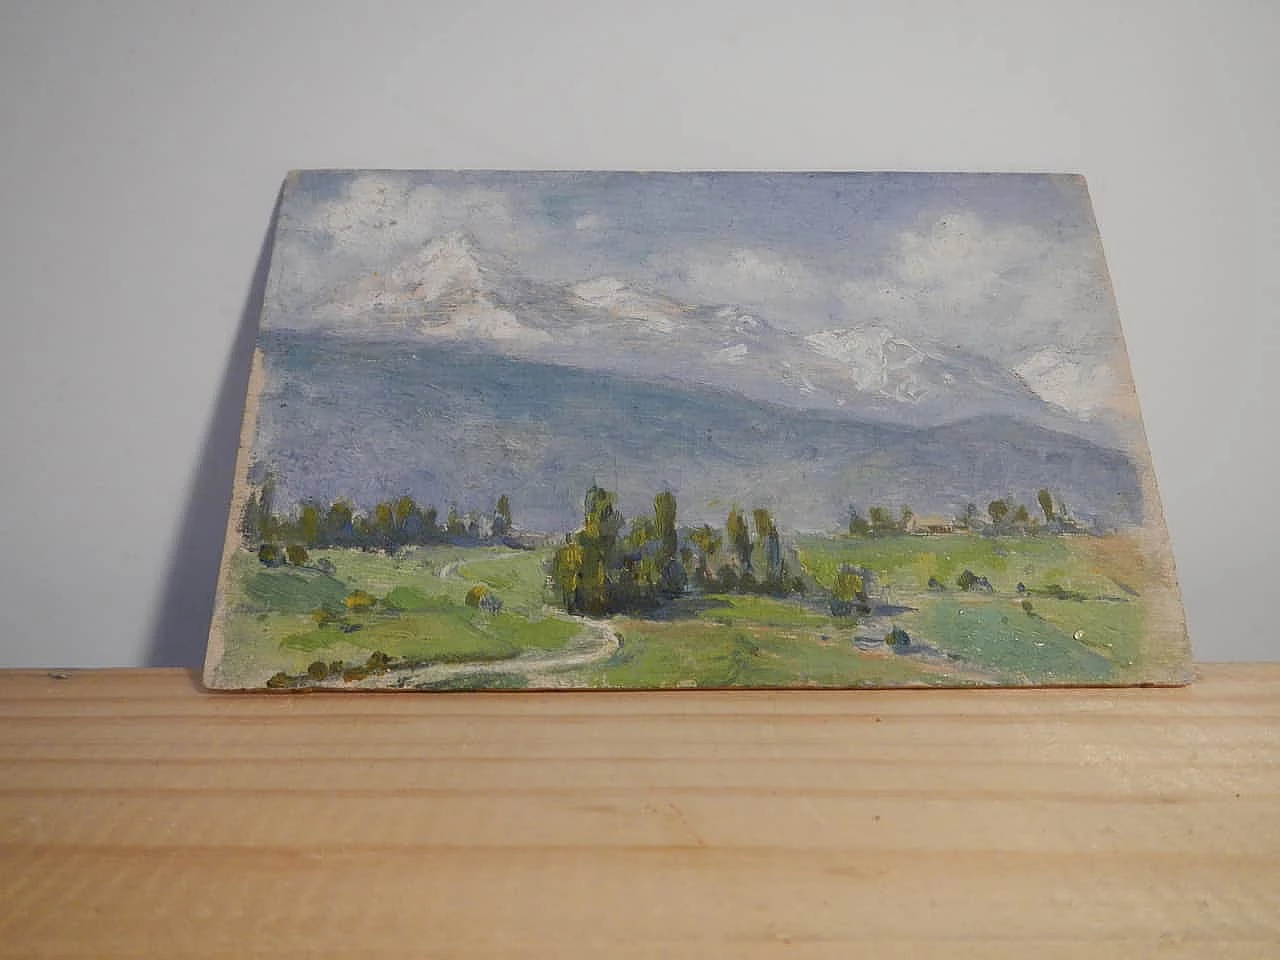 Des Champs, mountain landscape, painting on wood, early 20th century 6